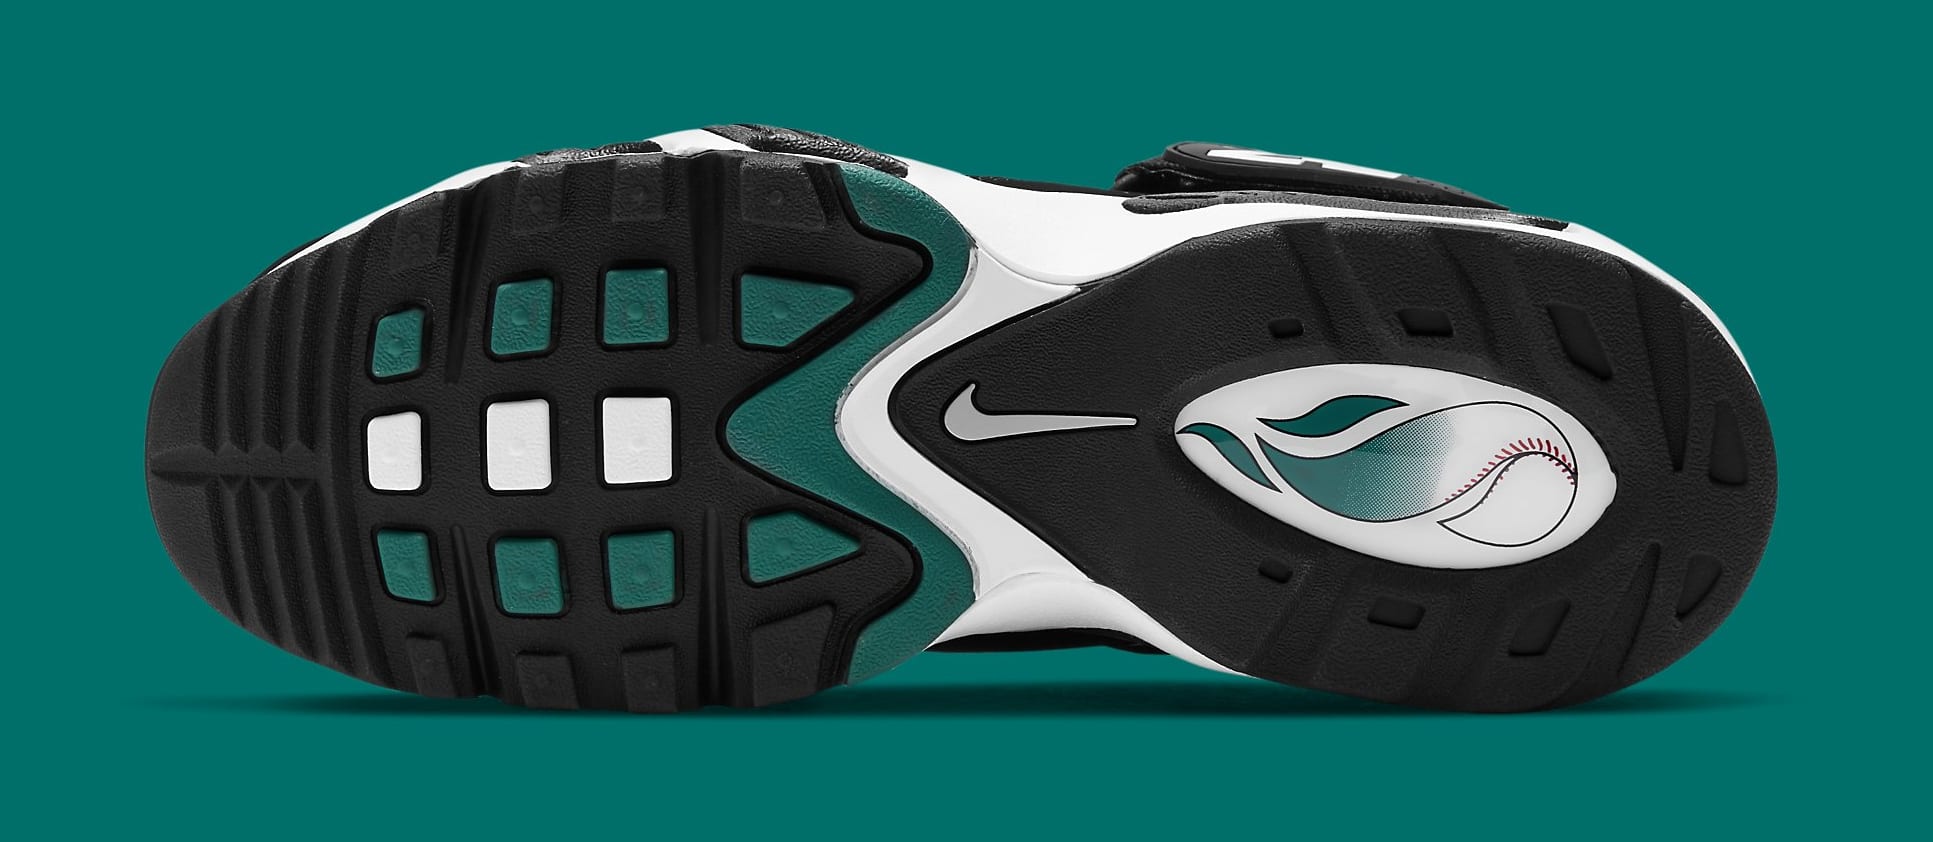 Nike Air Griffey Max 1 'Freshwater' Release Date. Nike SNKRS